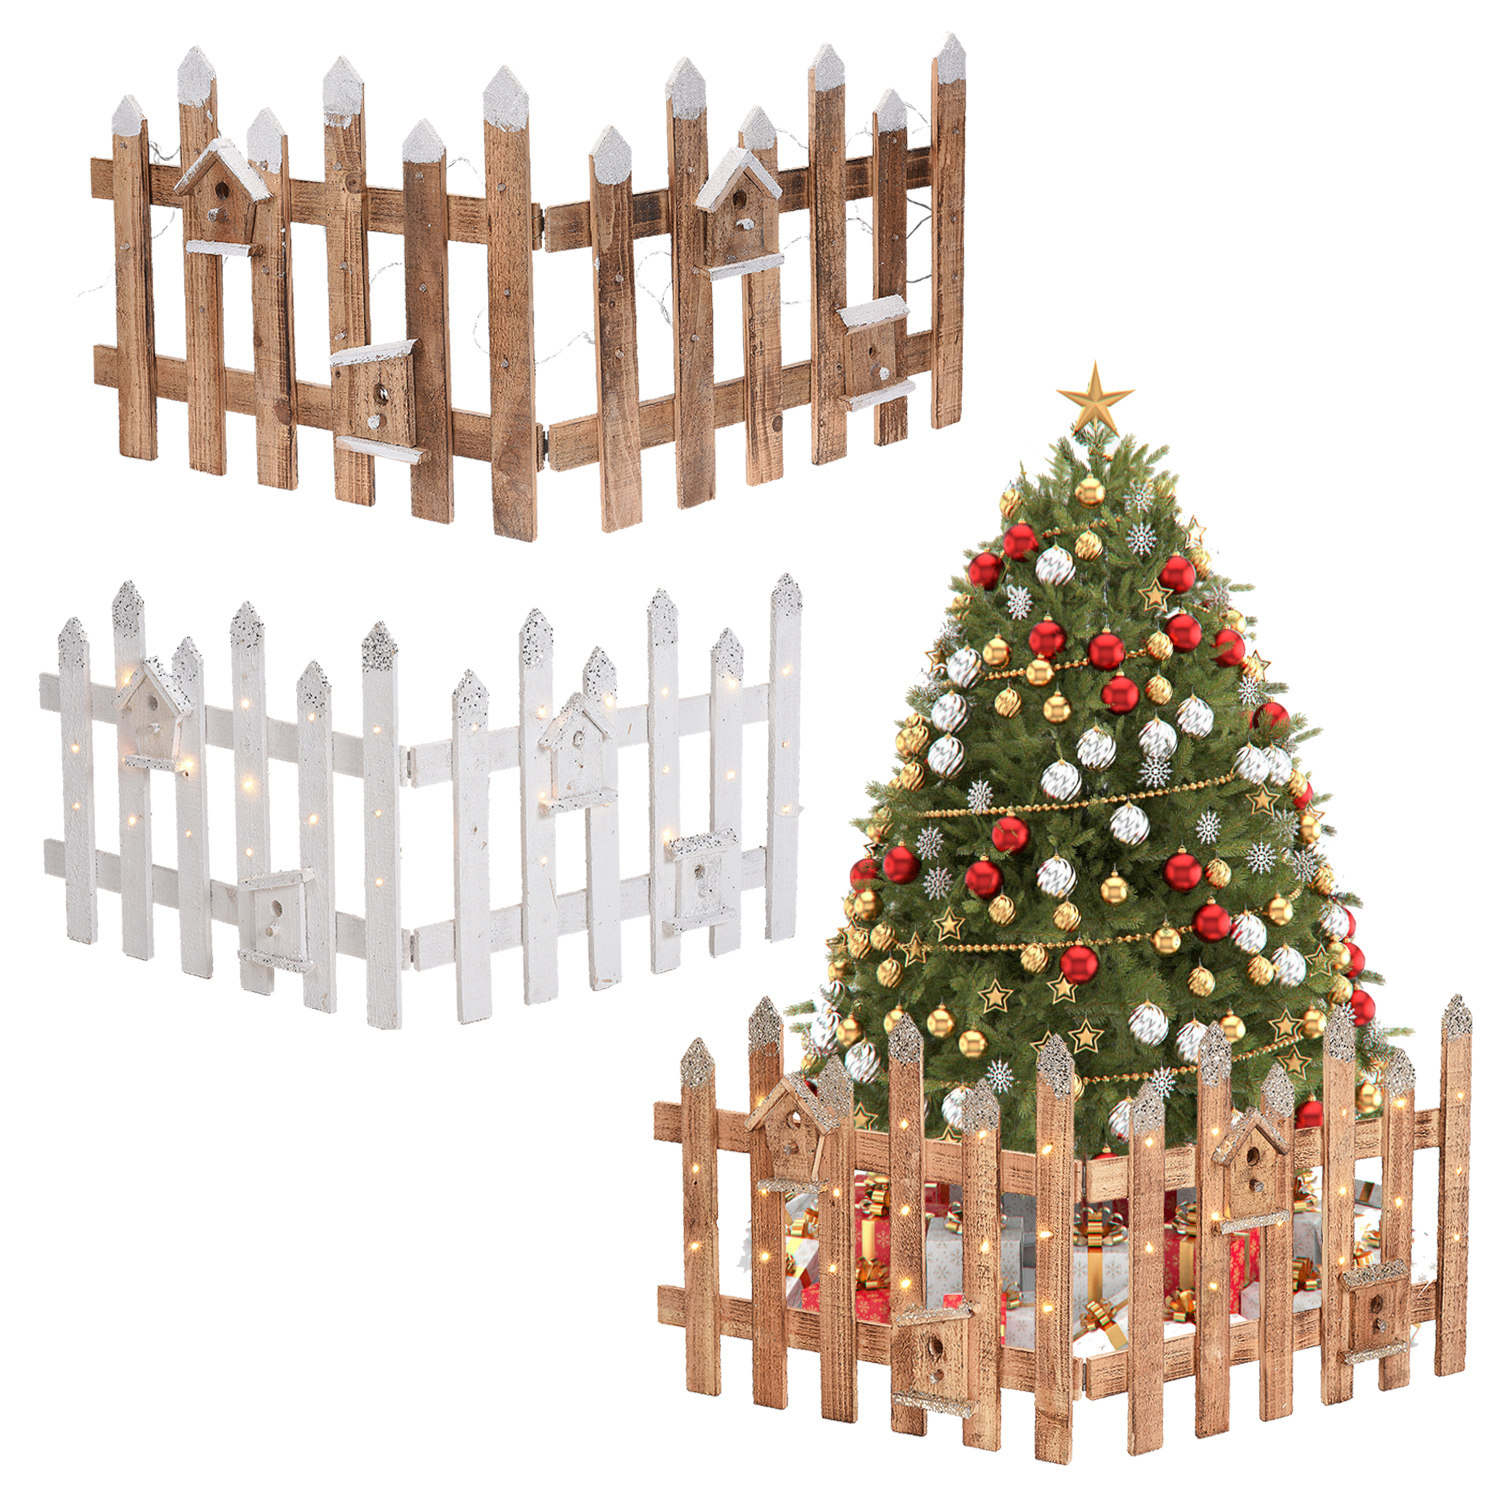 Rustic Wooden Snow Fence 30 LED Lights Christmas Xmas Tree Skirt Stand Cover NEW